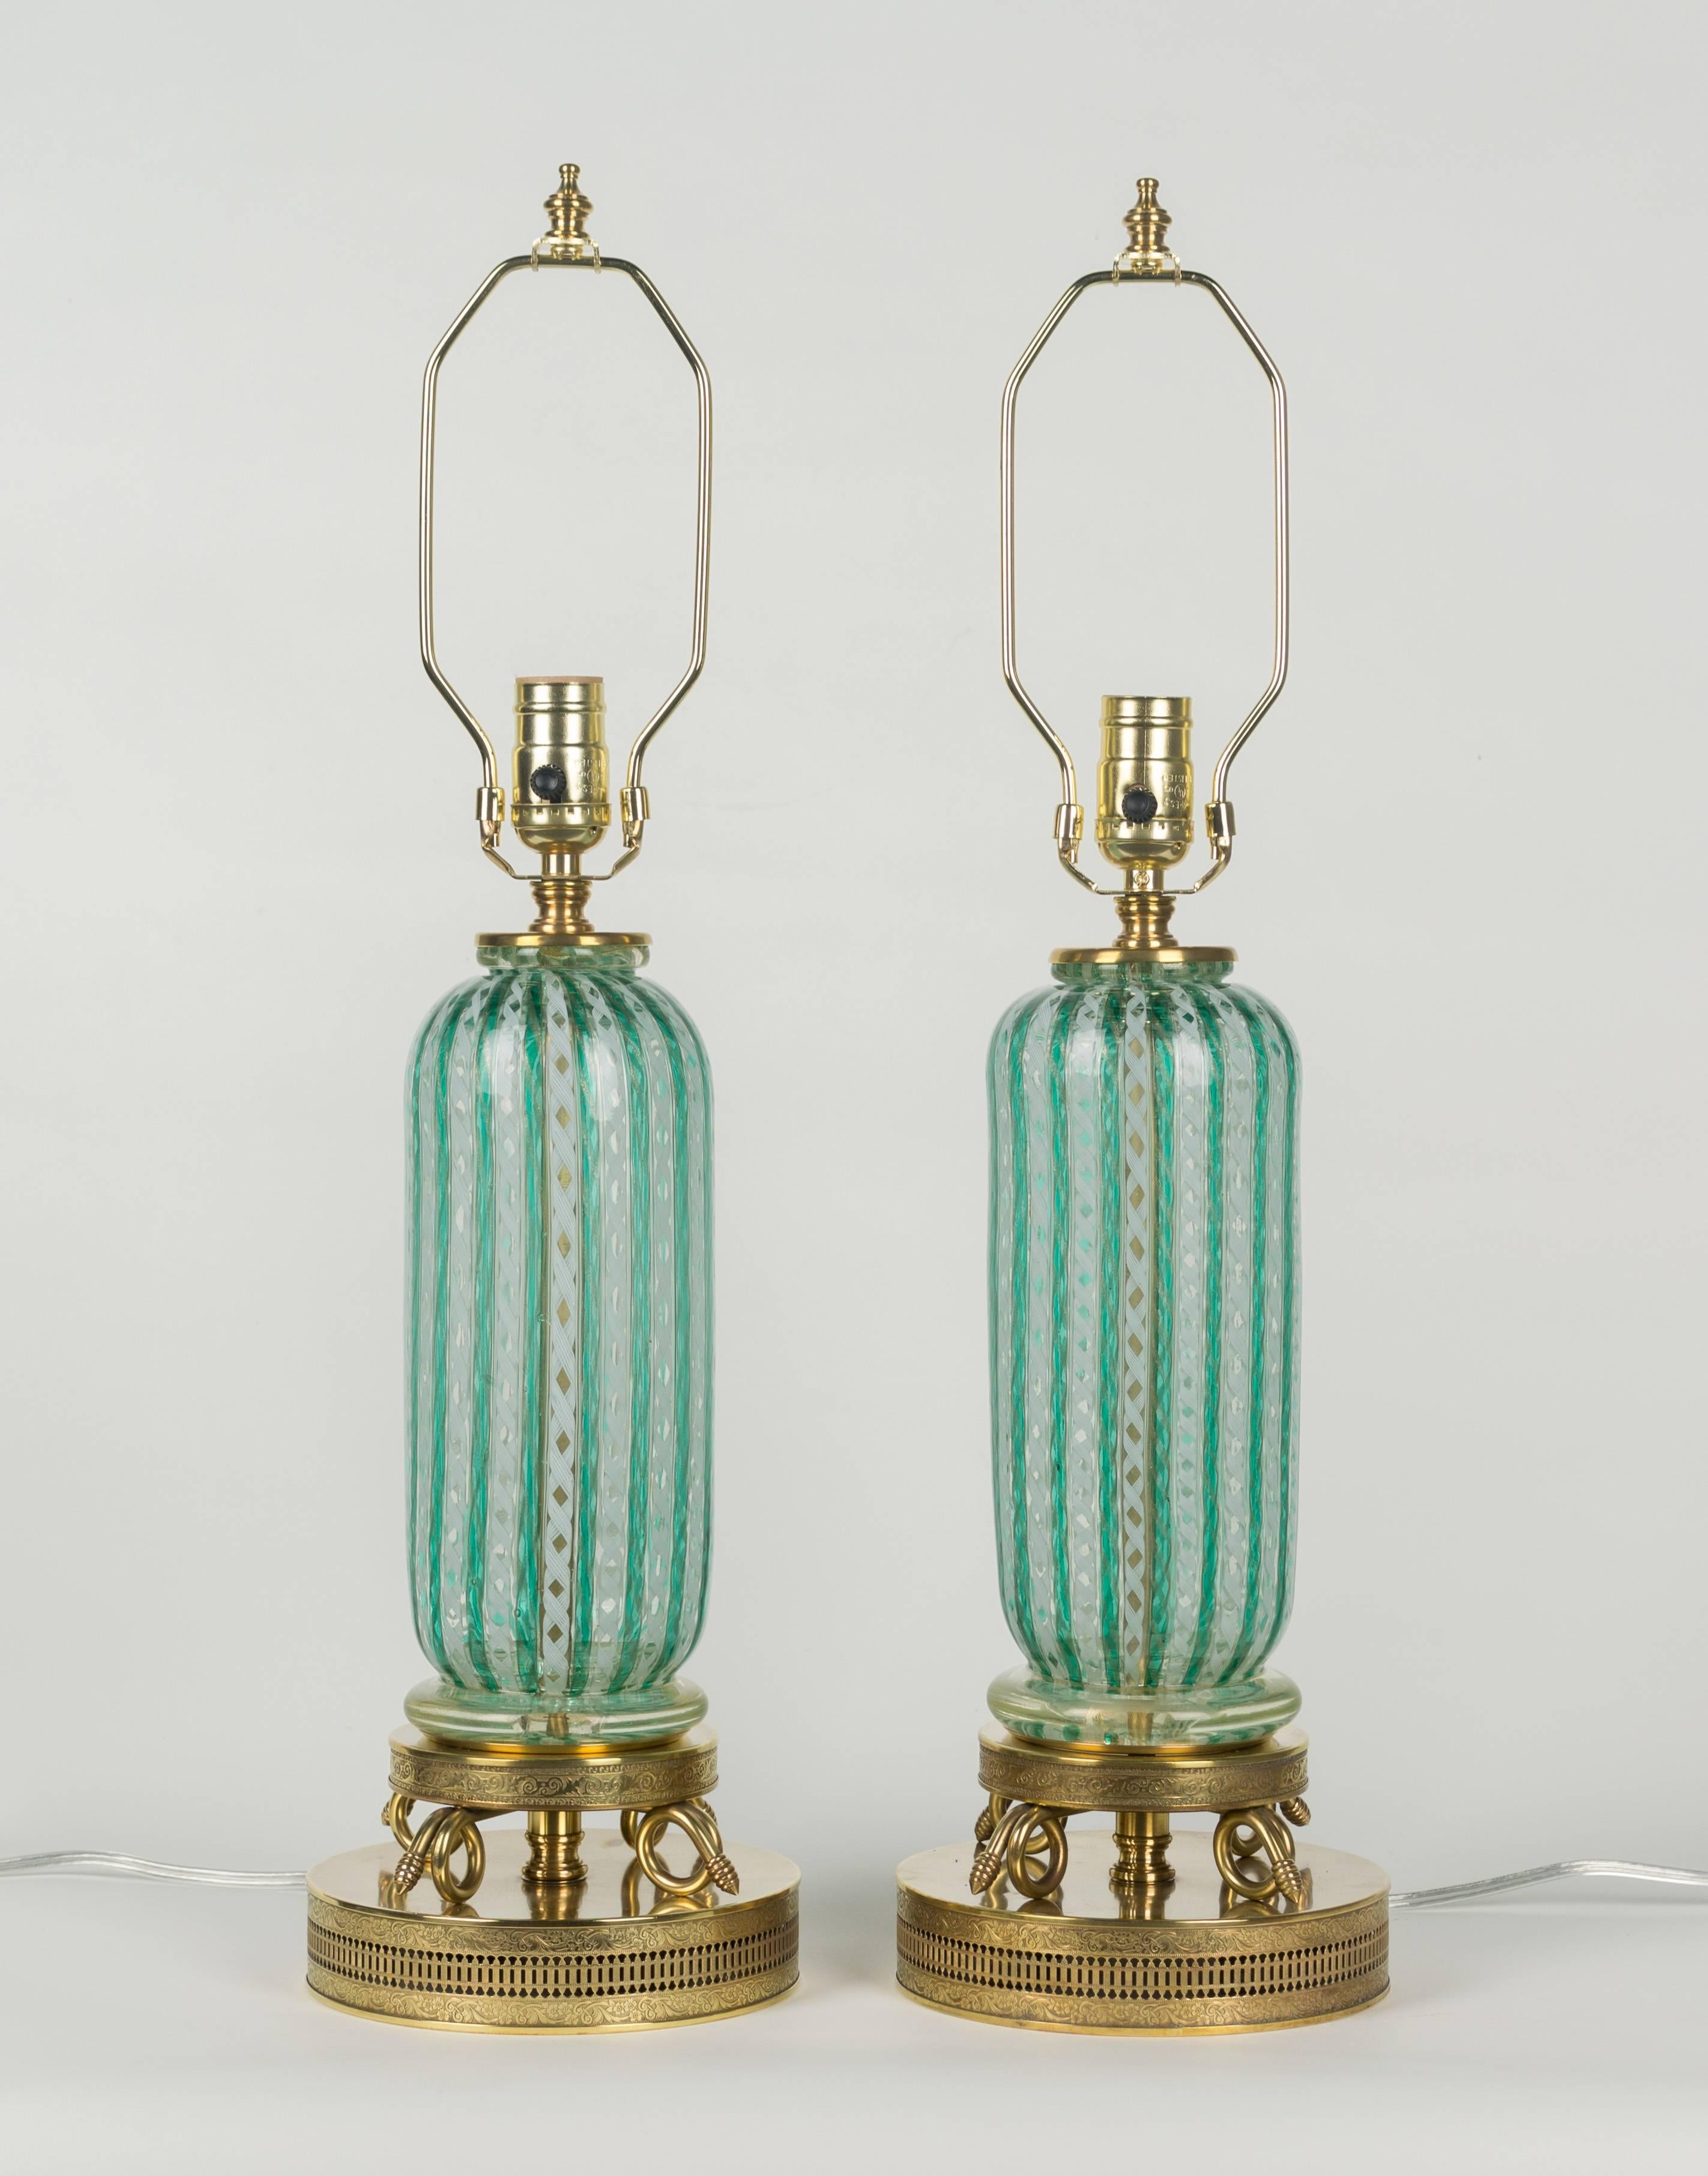 Pair of exquisite Murano glass lamps. Latticino ribbons of green with Zanfirico white stripes. Gold inclusions throughout. Original polished brass fittings, including an ornate tiered base with delicate embossed floral detail and serpentine loops.